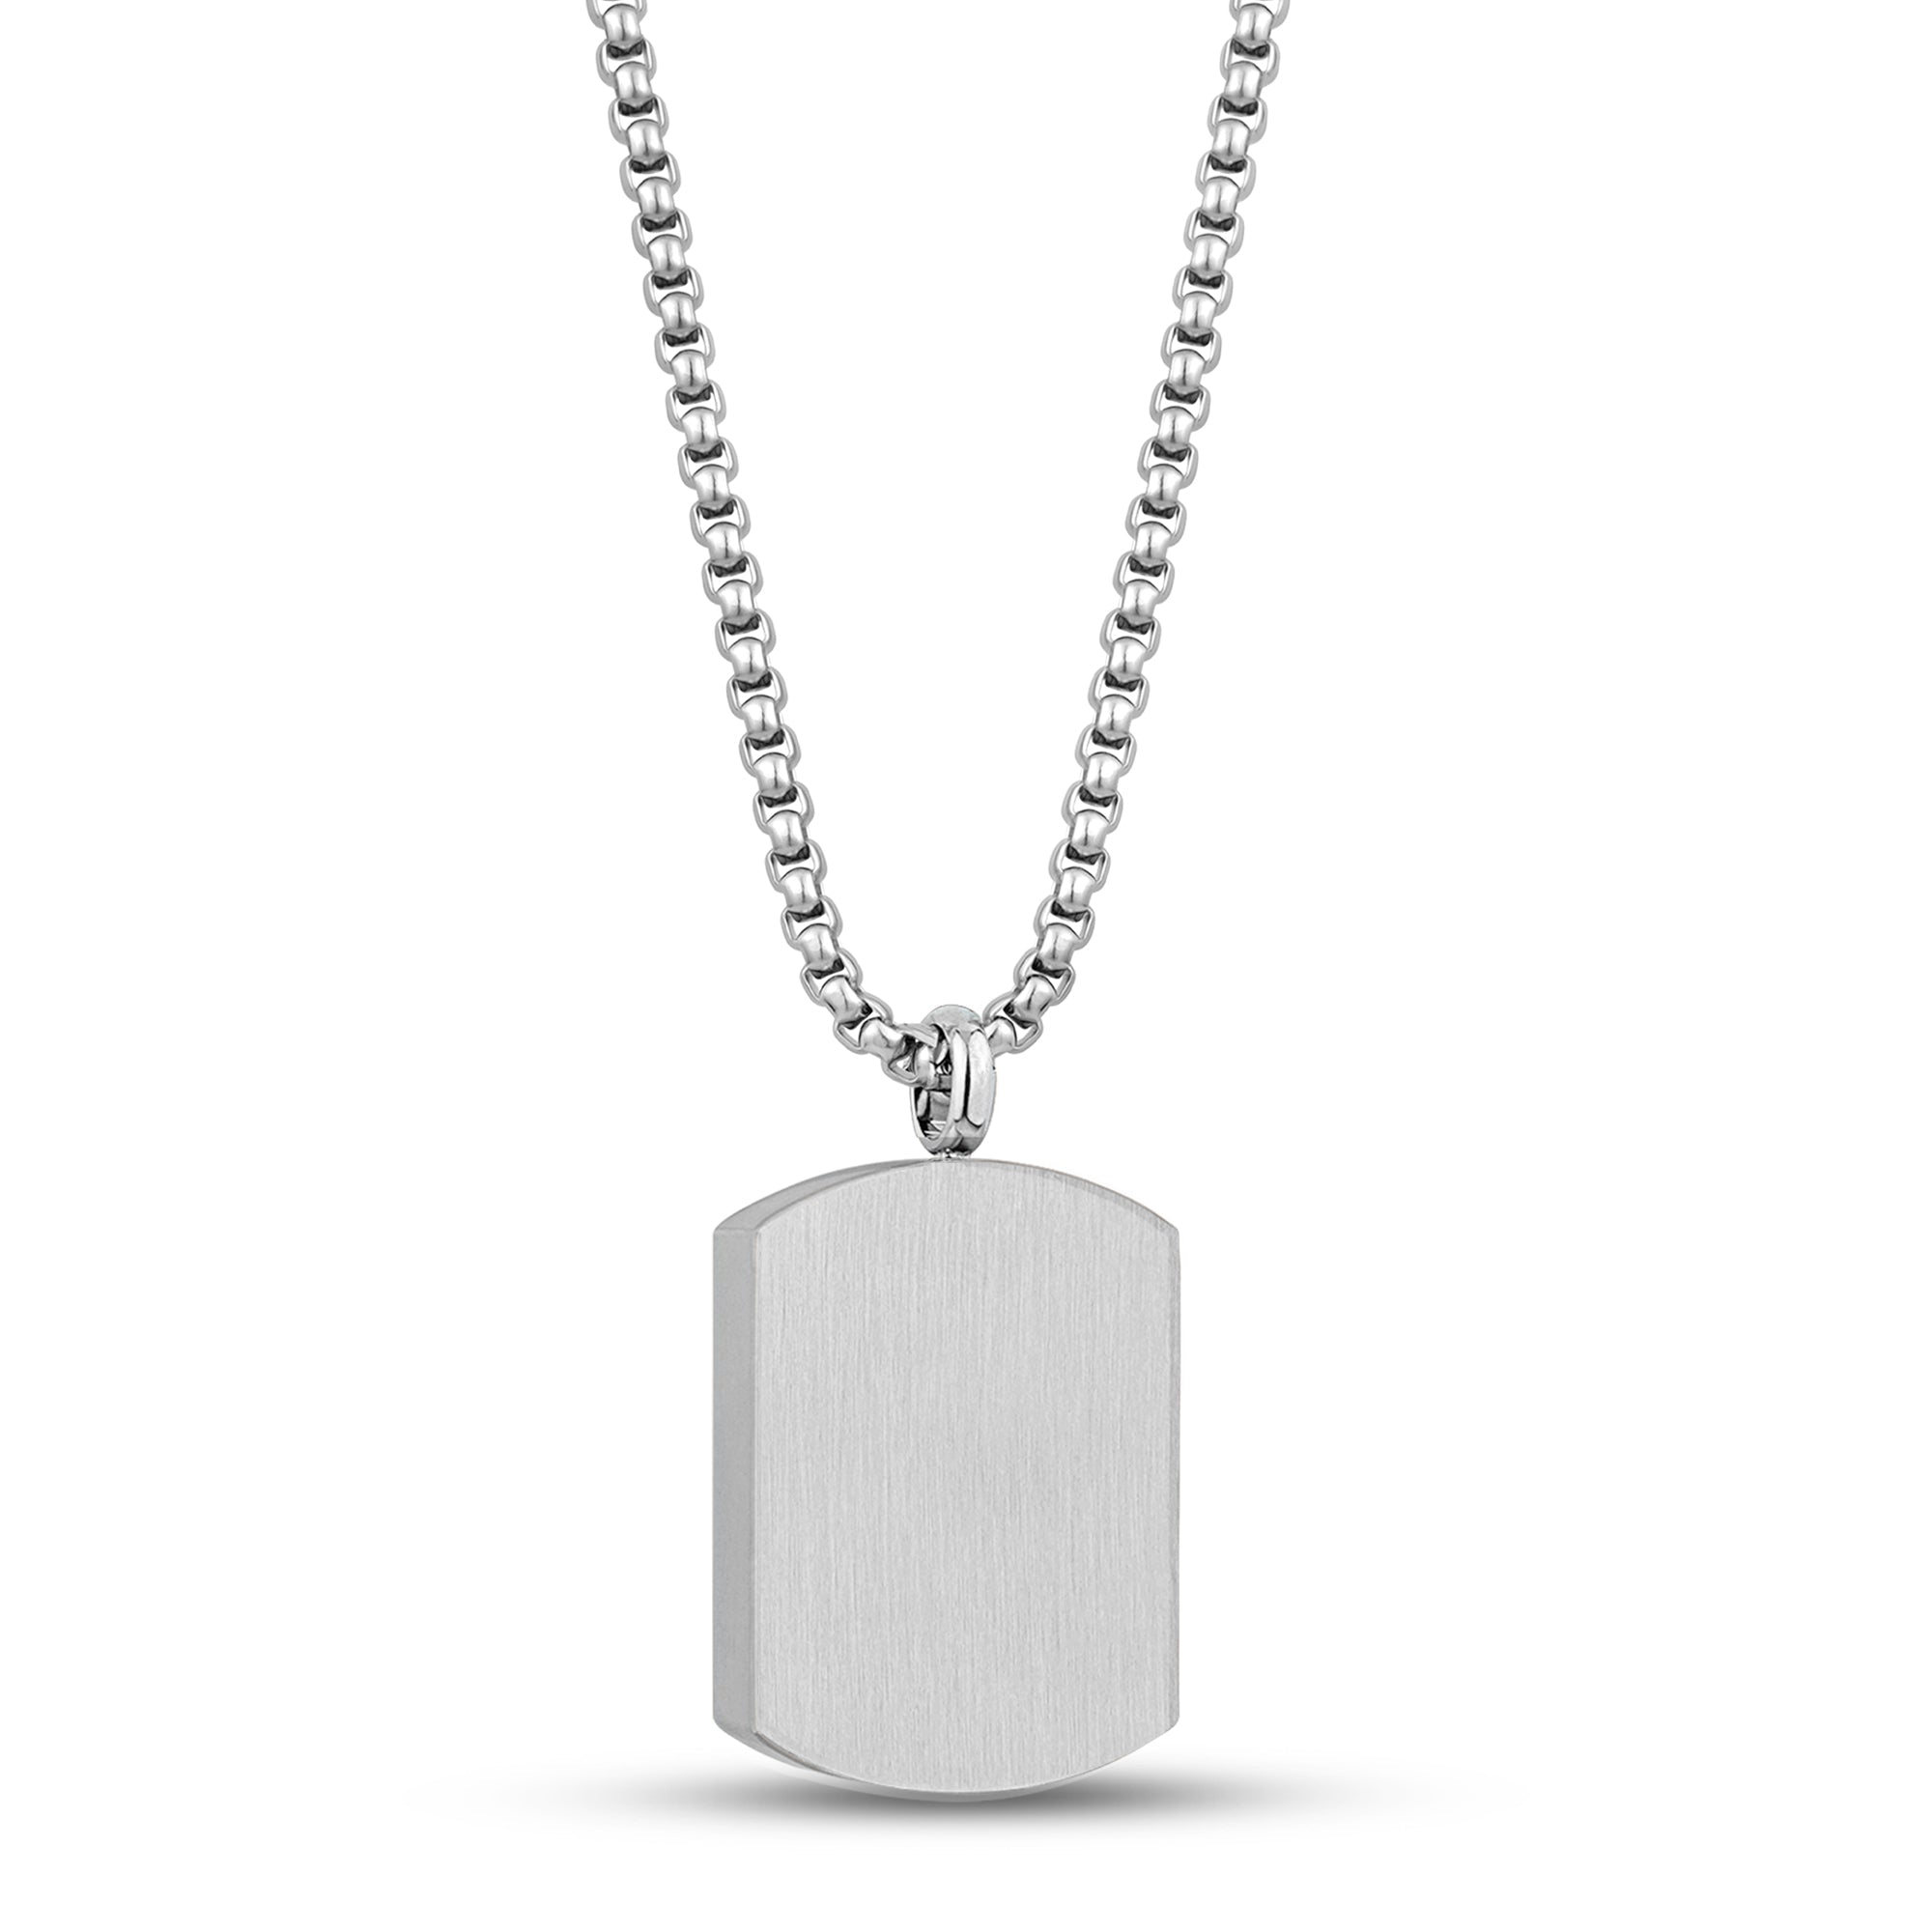 Personalized Silver Dog Tag - Create Yours Today